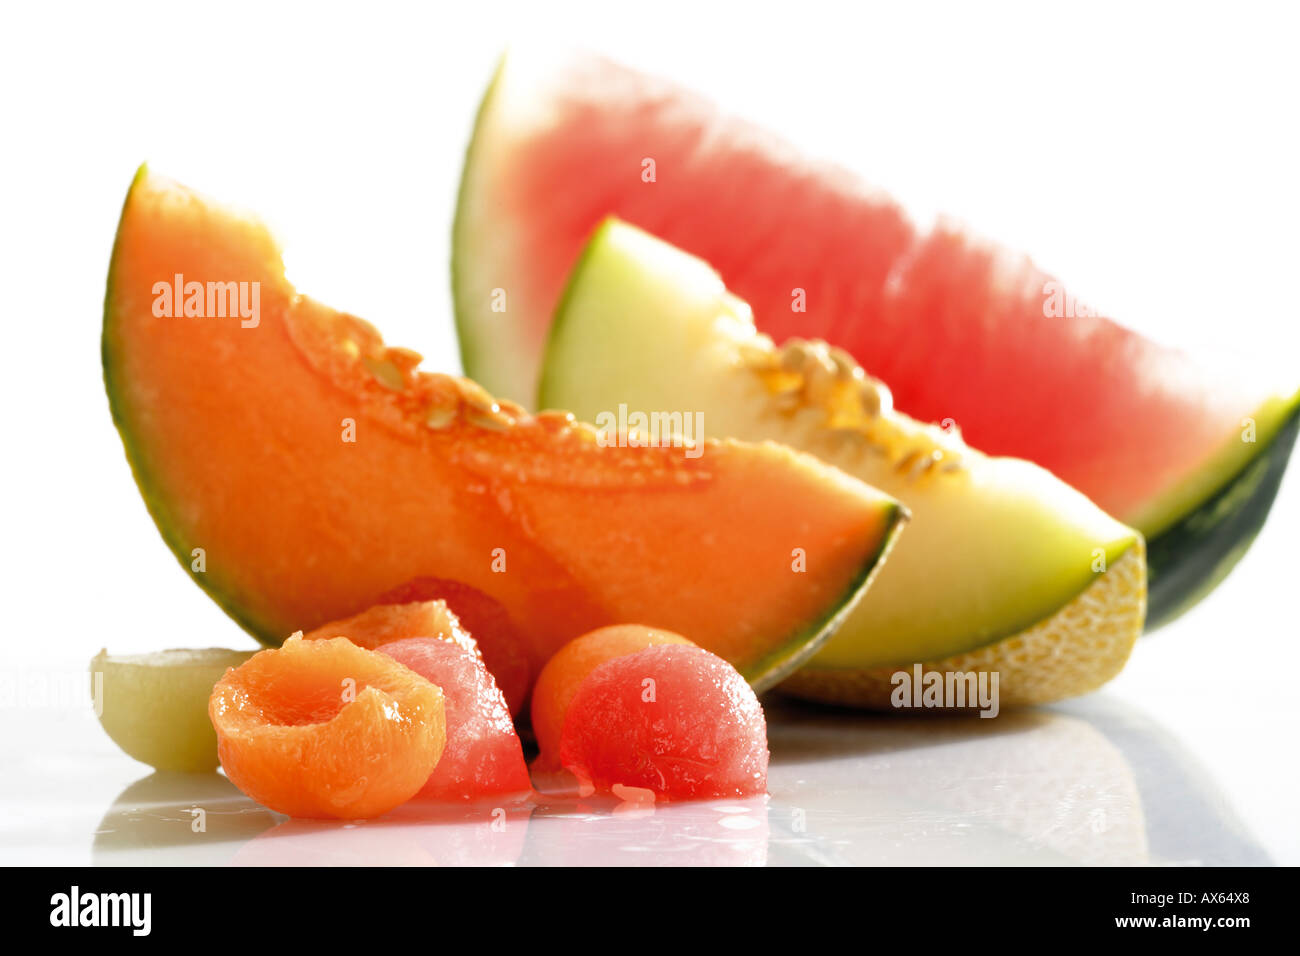 Melon balls and sliced melons Stock Photo